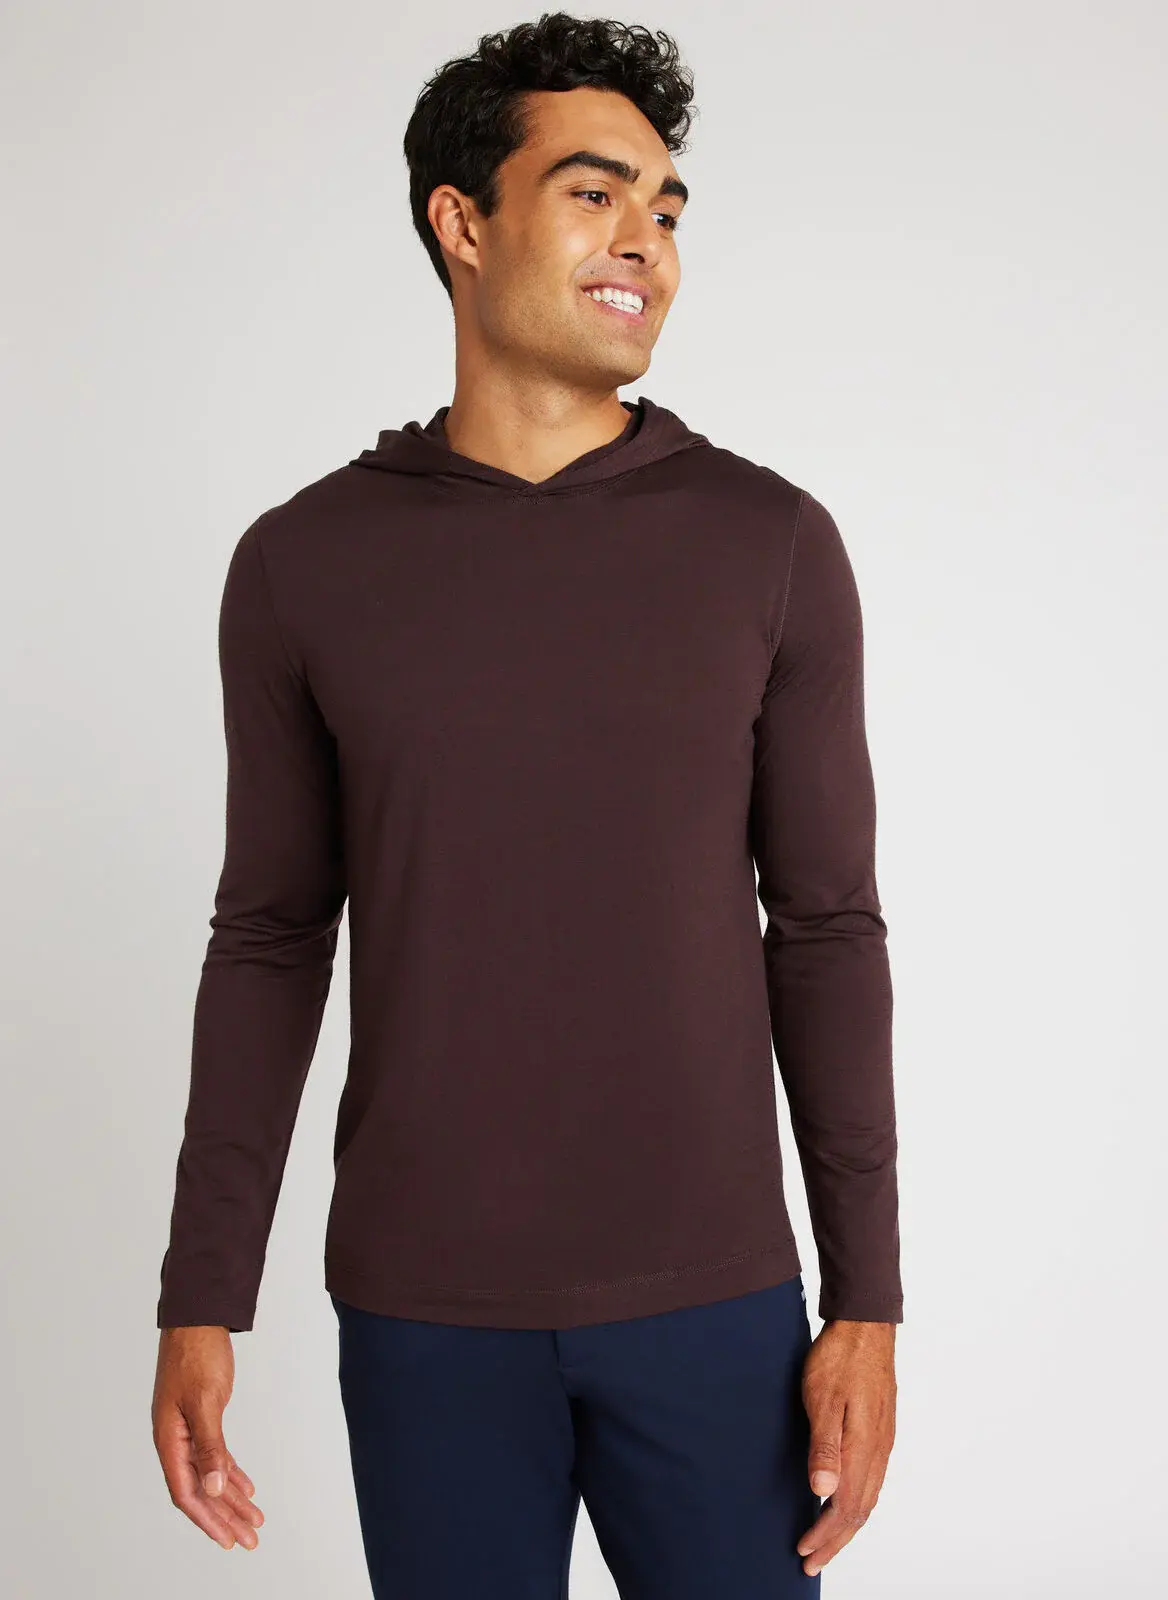 Kit And Ace Merino Jersey Hooded Tee. 1